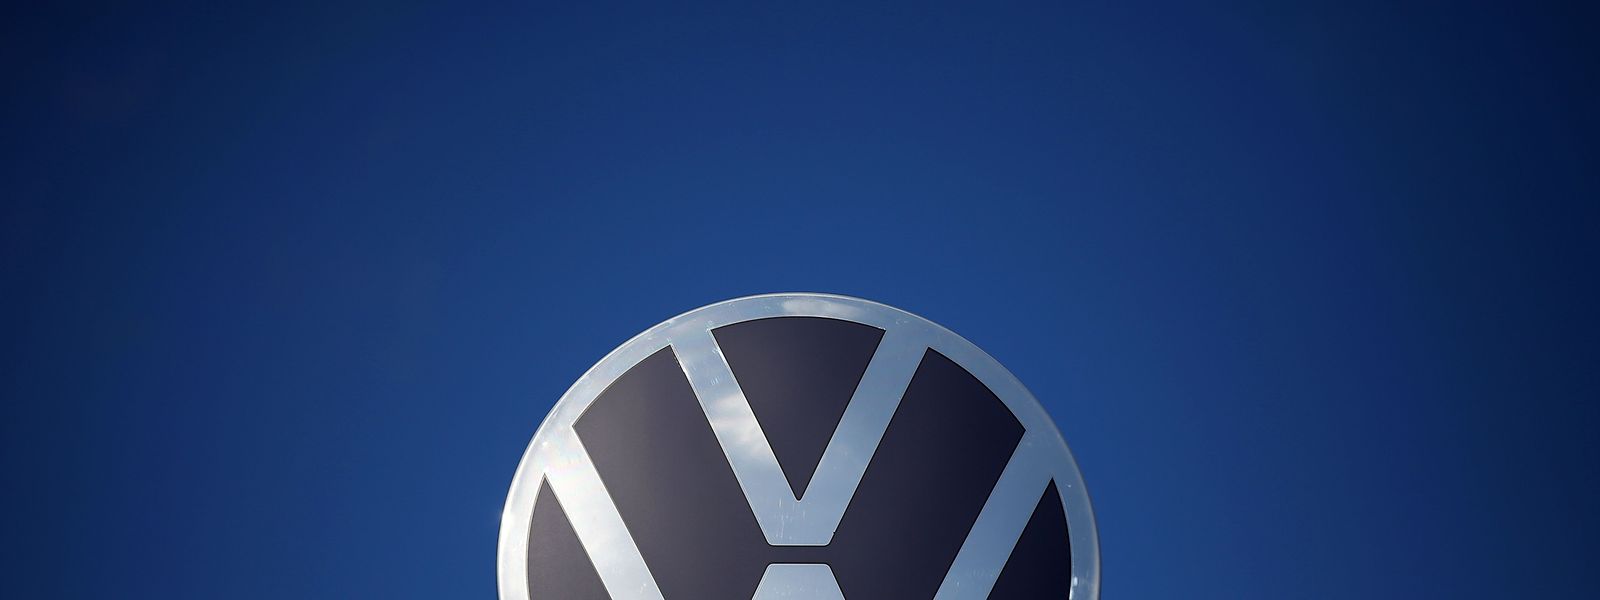 (FILES) In this file photo taken on February 28, 2020 The logo of German car maker Volkswagen (VW) is pictured at the company's headquarters in Wolfsburg on February 28, 2020. - A British court ruled in favour of tens of thousands of motorists on April 6, 2020 who were suing Volkswagen for compensation over the "dieselgate" emissions cheating scandal. (Photo by Ronny Hartmann / AFP)